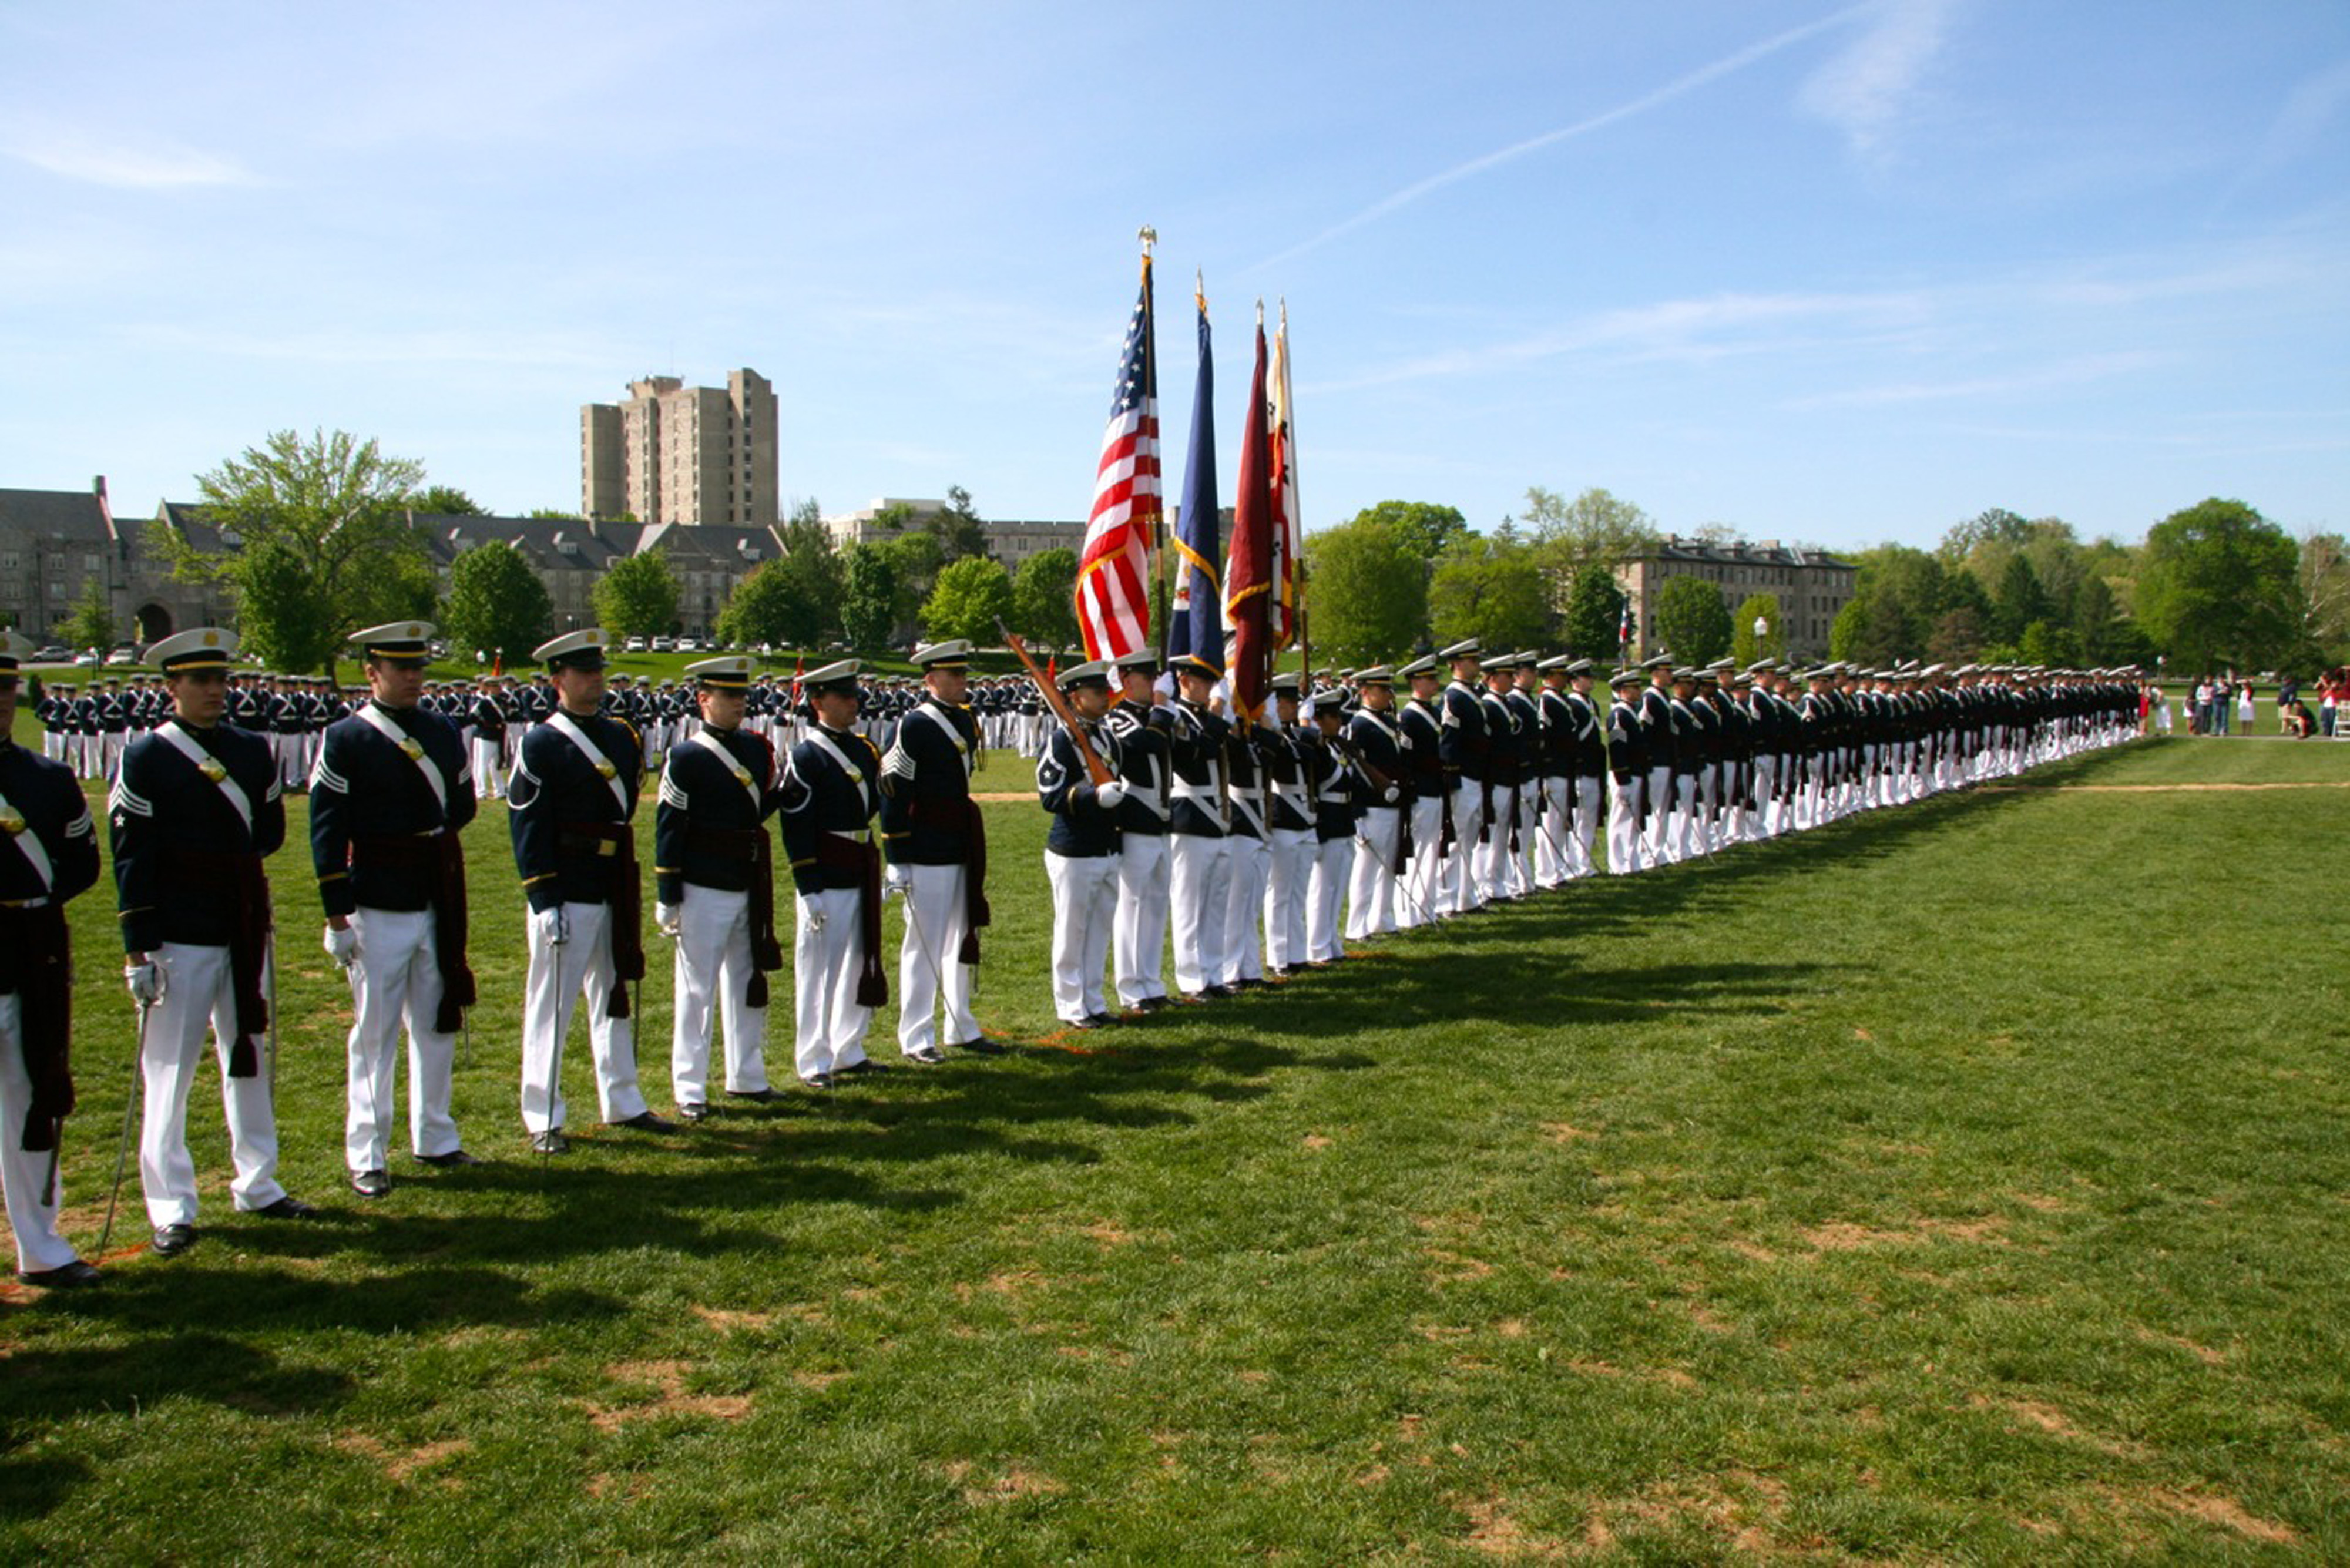 Members of the Virginia Tech Corps of Cadets Class of 2011 are formed up on the Drillfield as they exit the Regiment for the last time during the Change of Command parade last spring